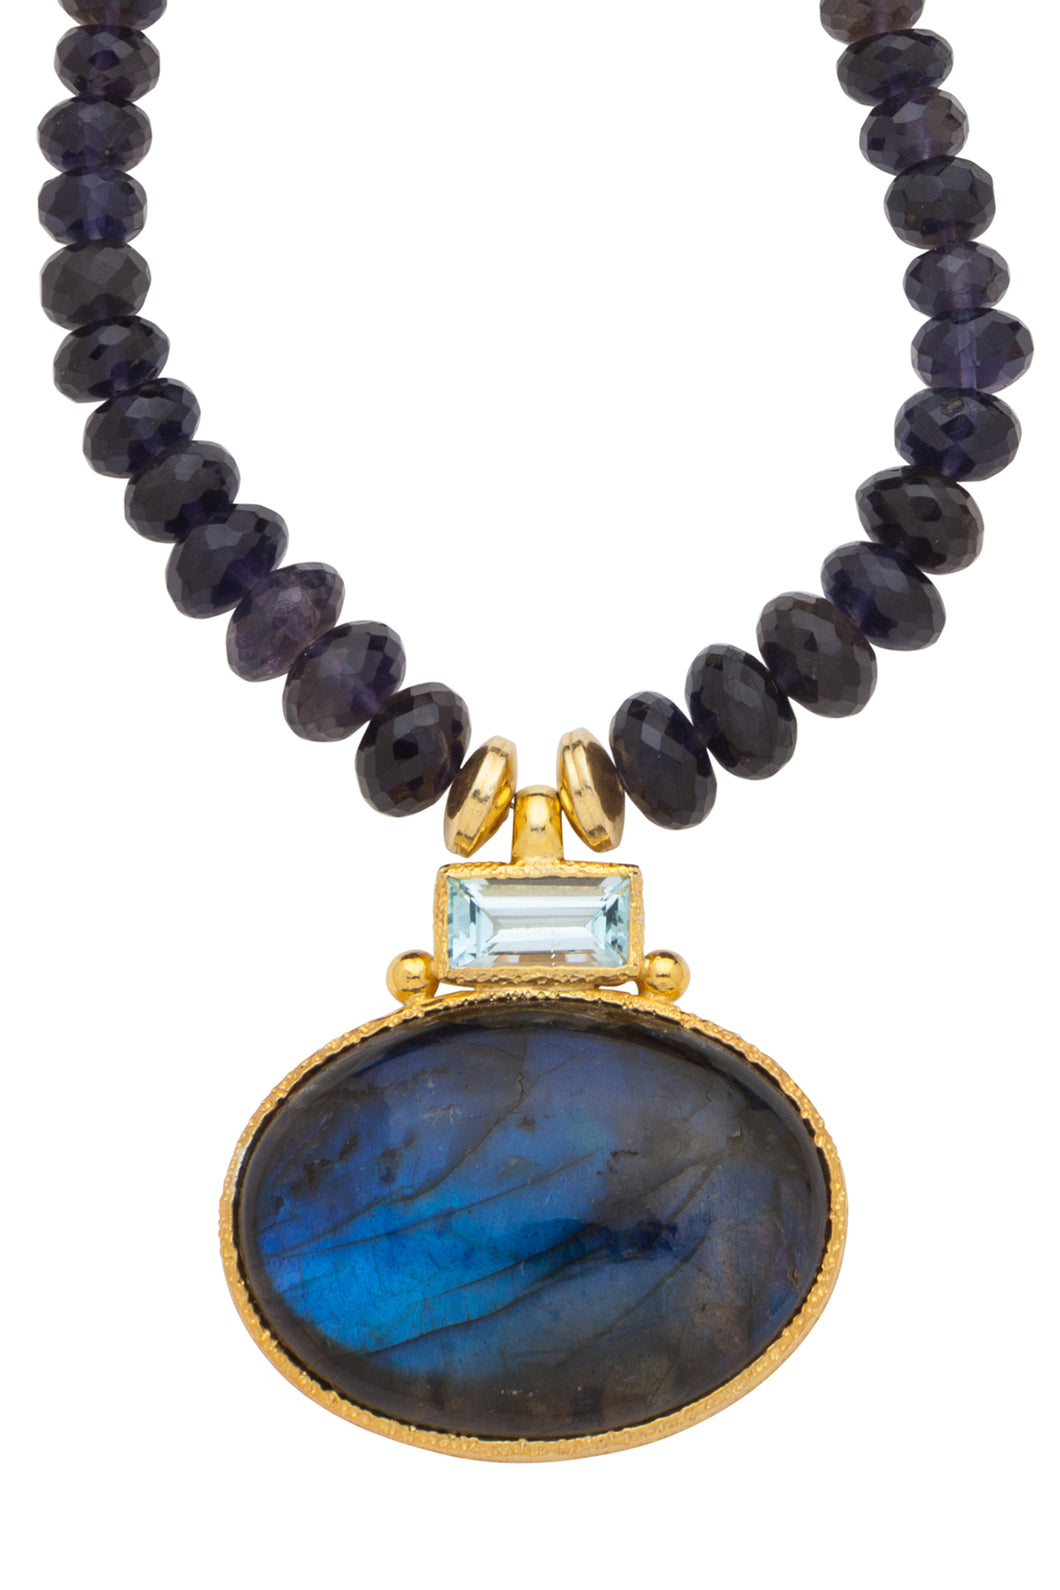 ONE OF A KIND Iolite Necklace with Blue Topaz and Labradorite Pendant set in 24kt gold vermeil  NF281-IBTL